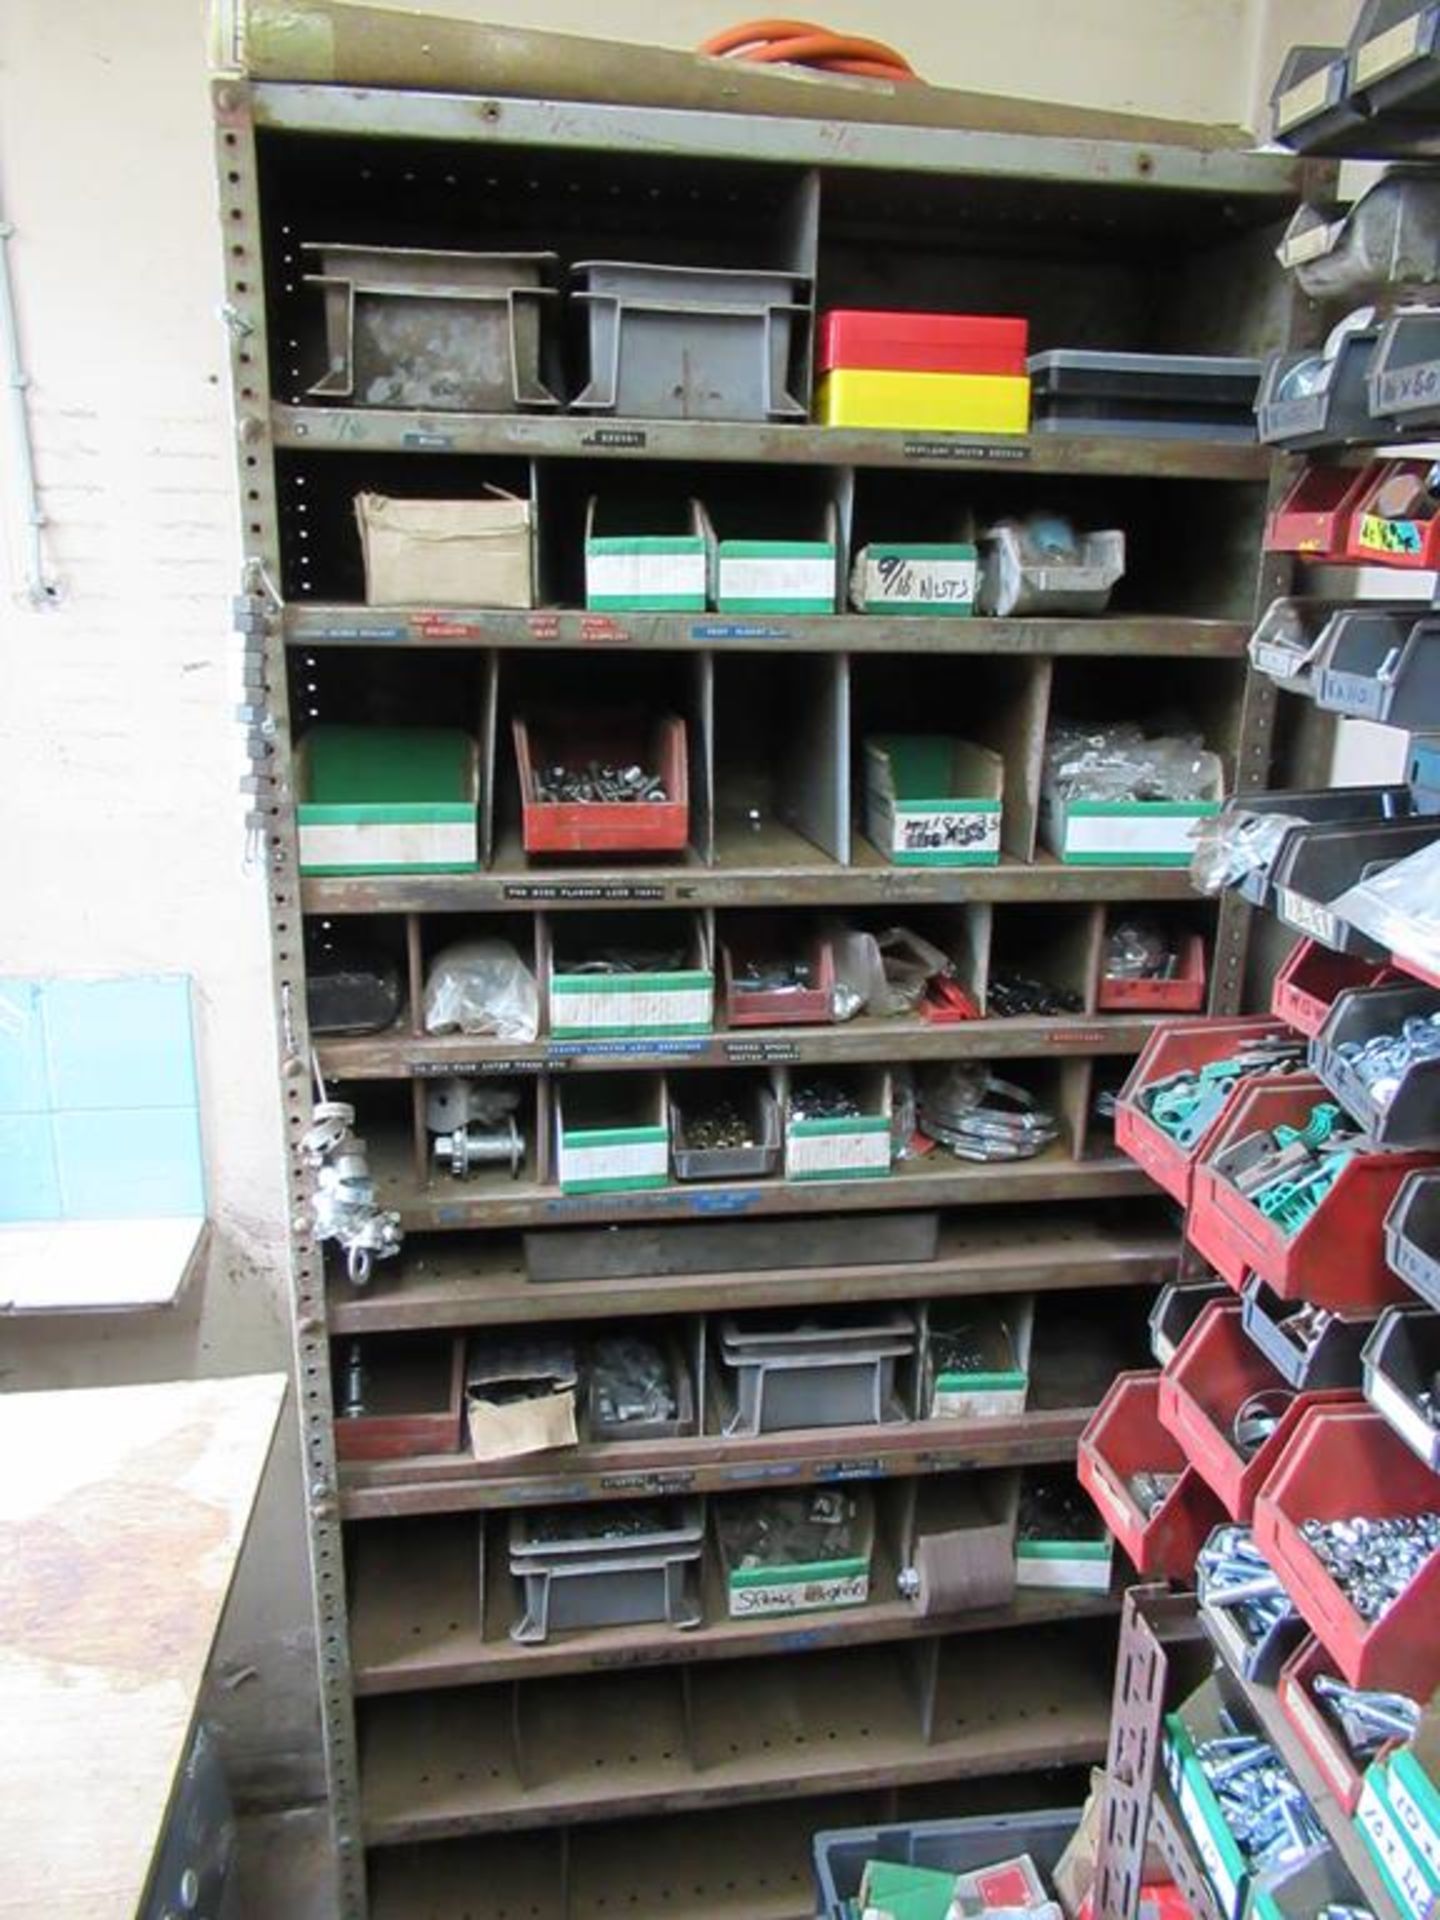 Contents of spares/store room